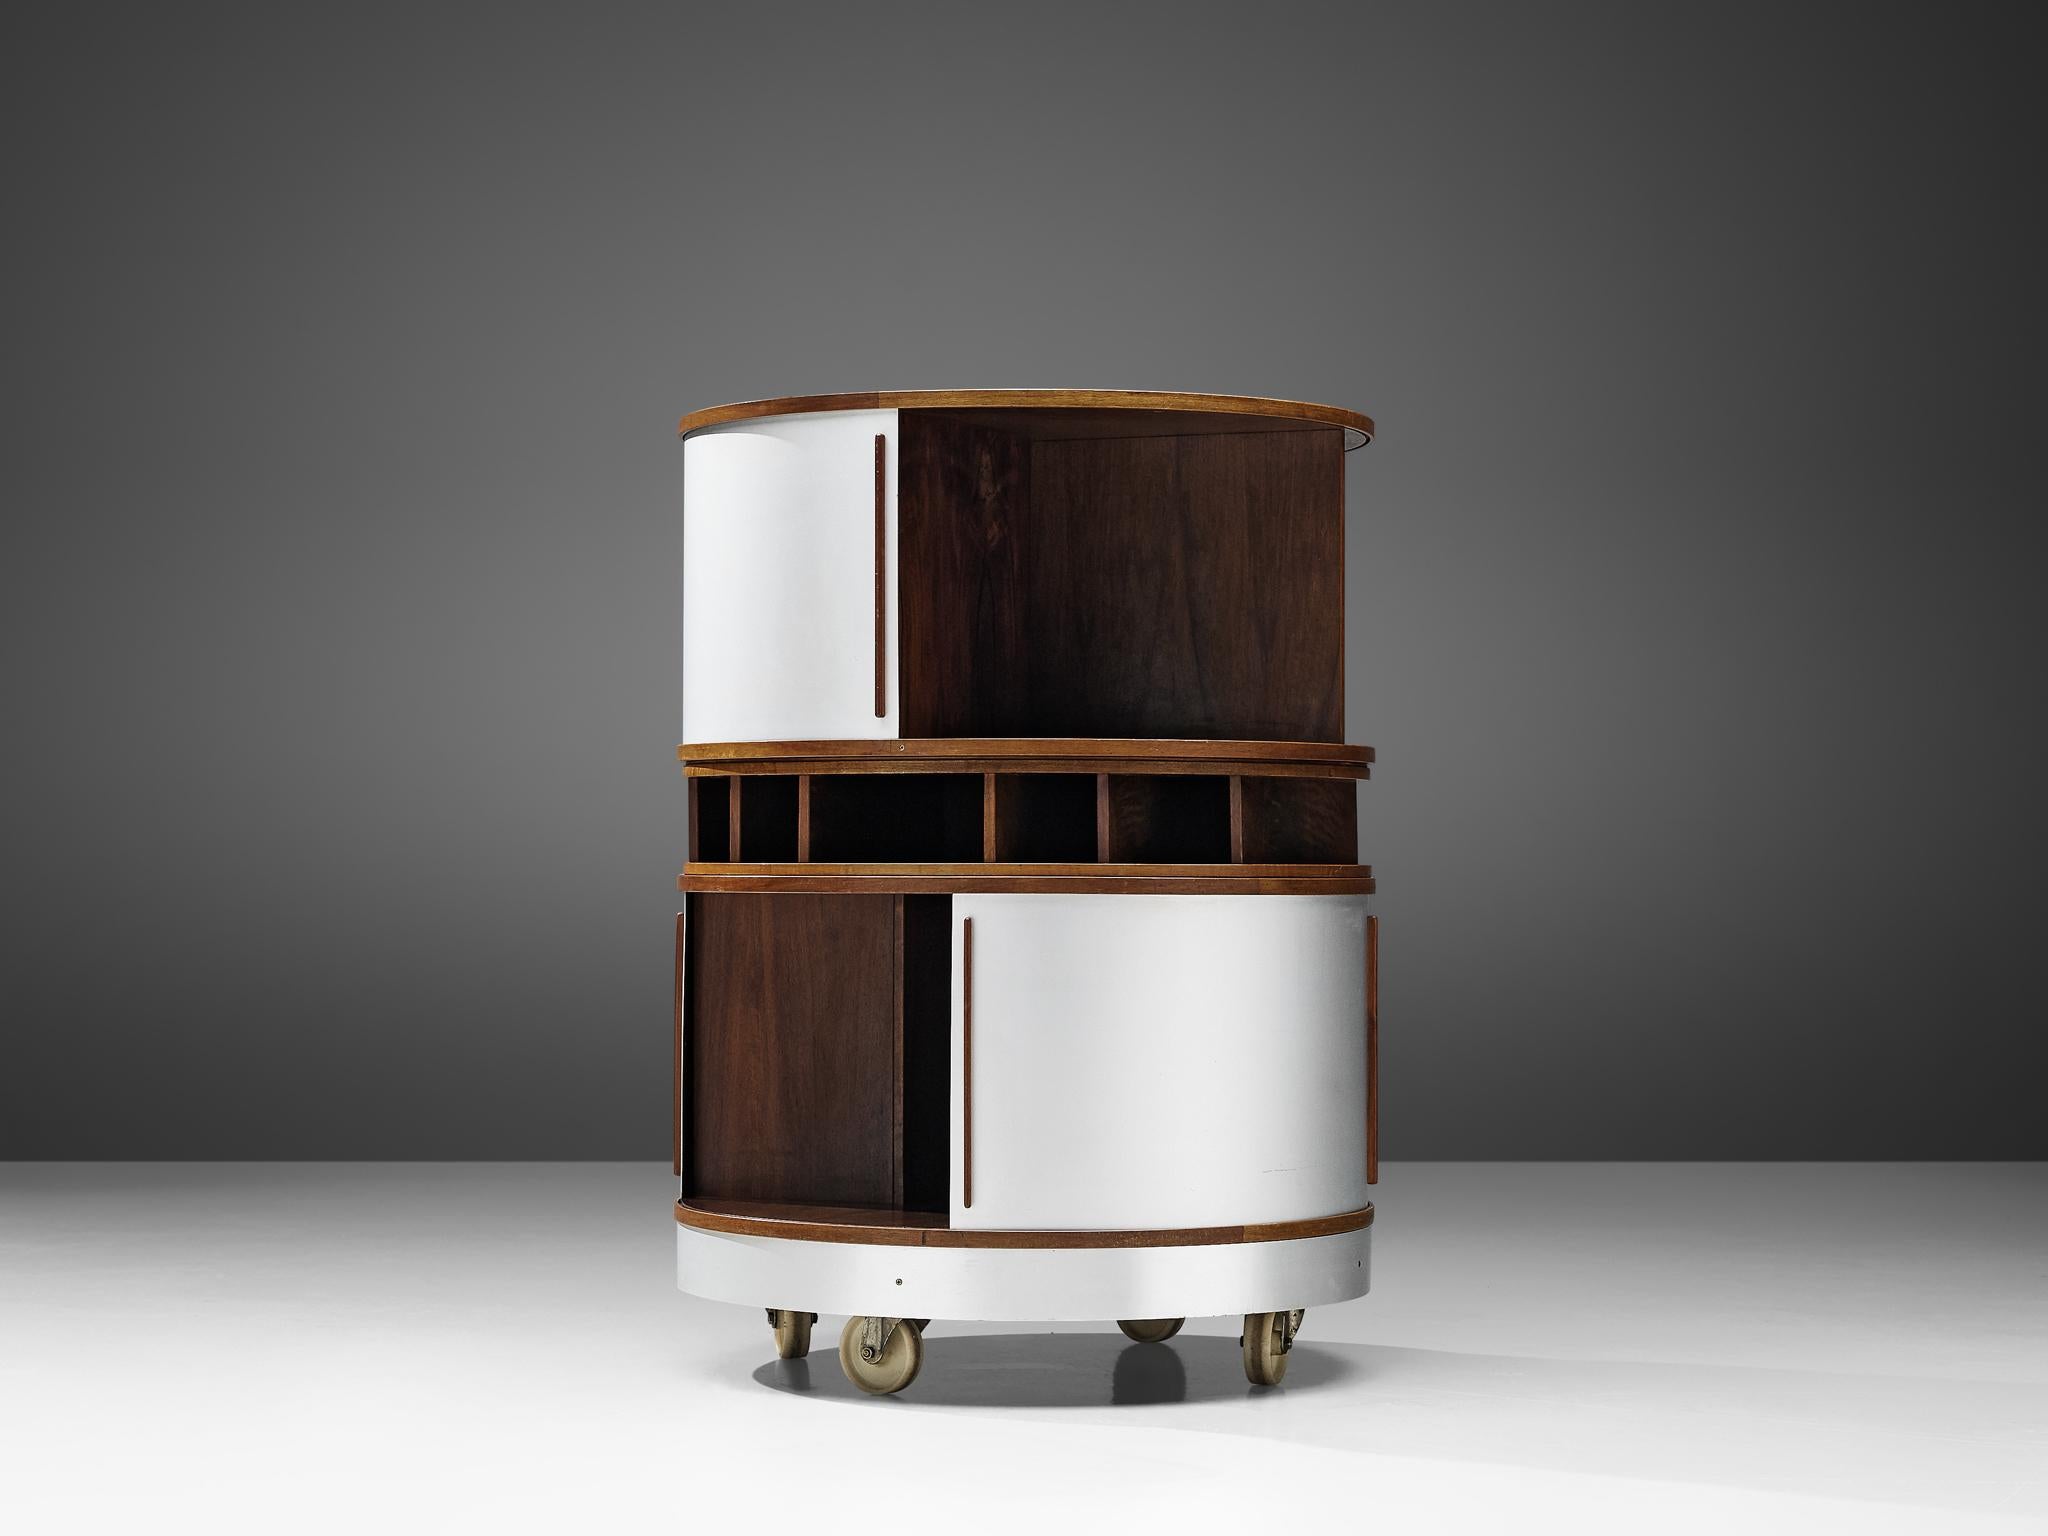 Joe Colombo for Bernini, 'Combi Center' trolley, plywood, aluminum, plastic, Italy, circa 1963.

A cylindrical storage unit on wheels, designed by Joe Colombo in circa 1963. The Space Age case piece features curvaceous, functional forms with